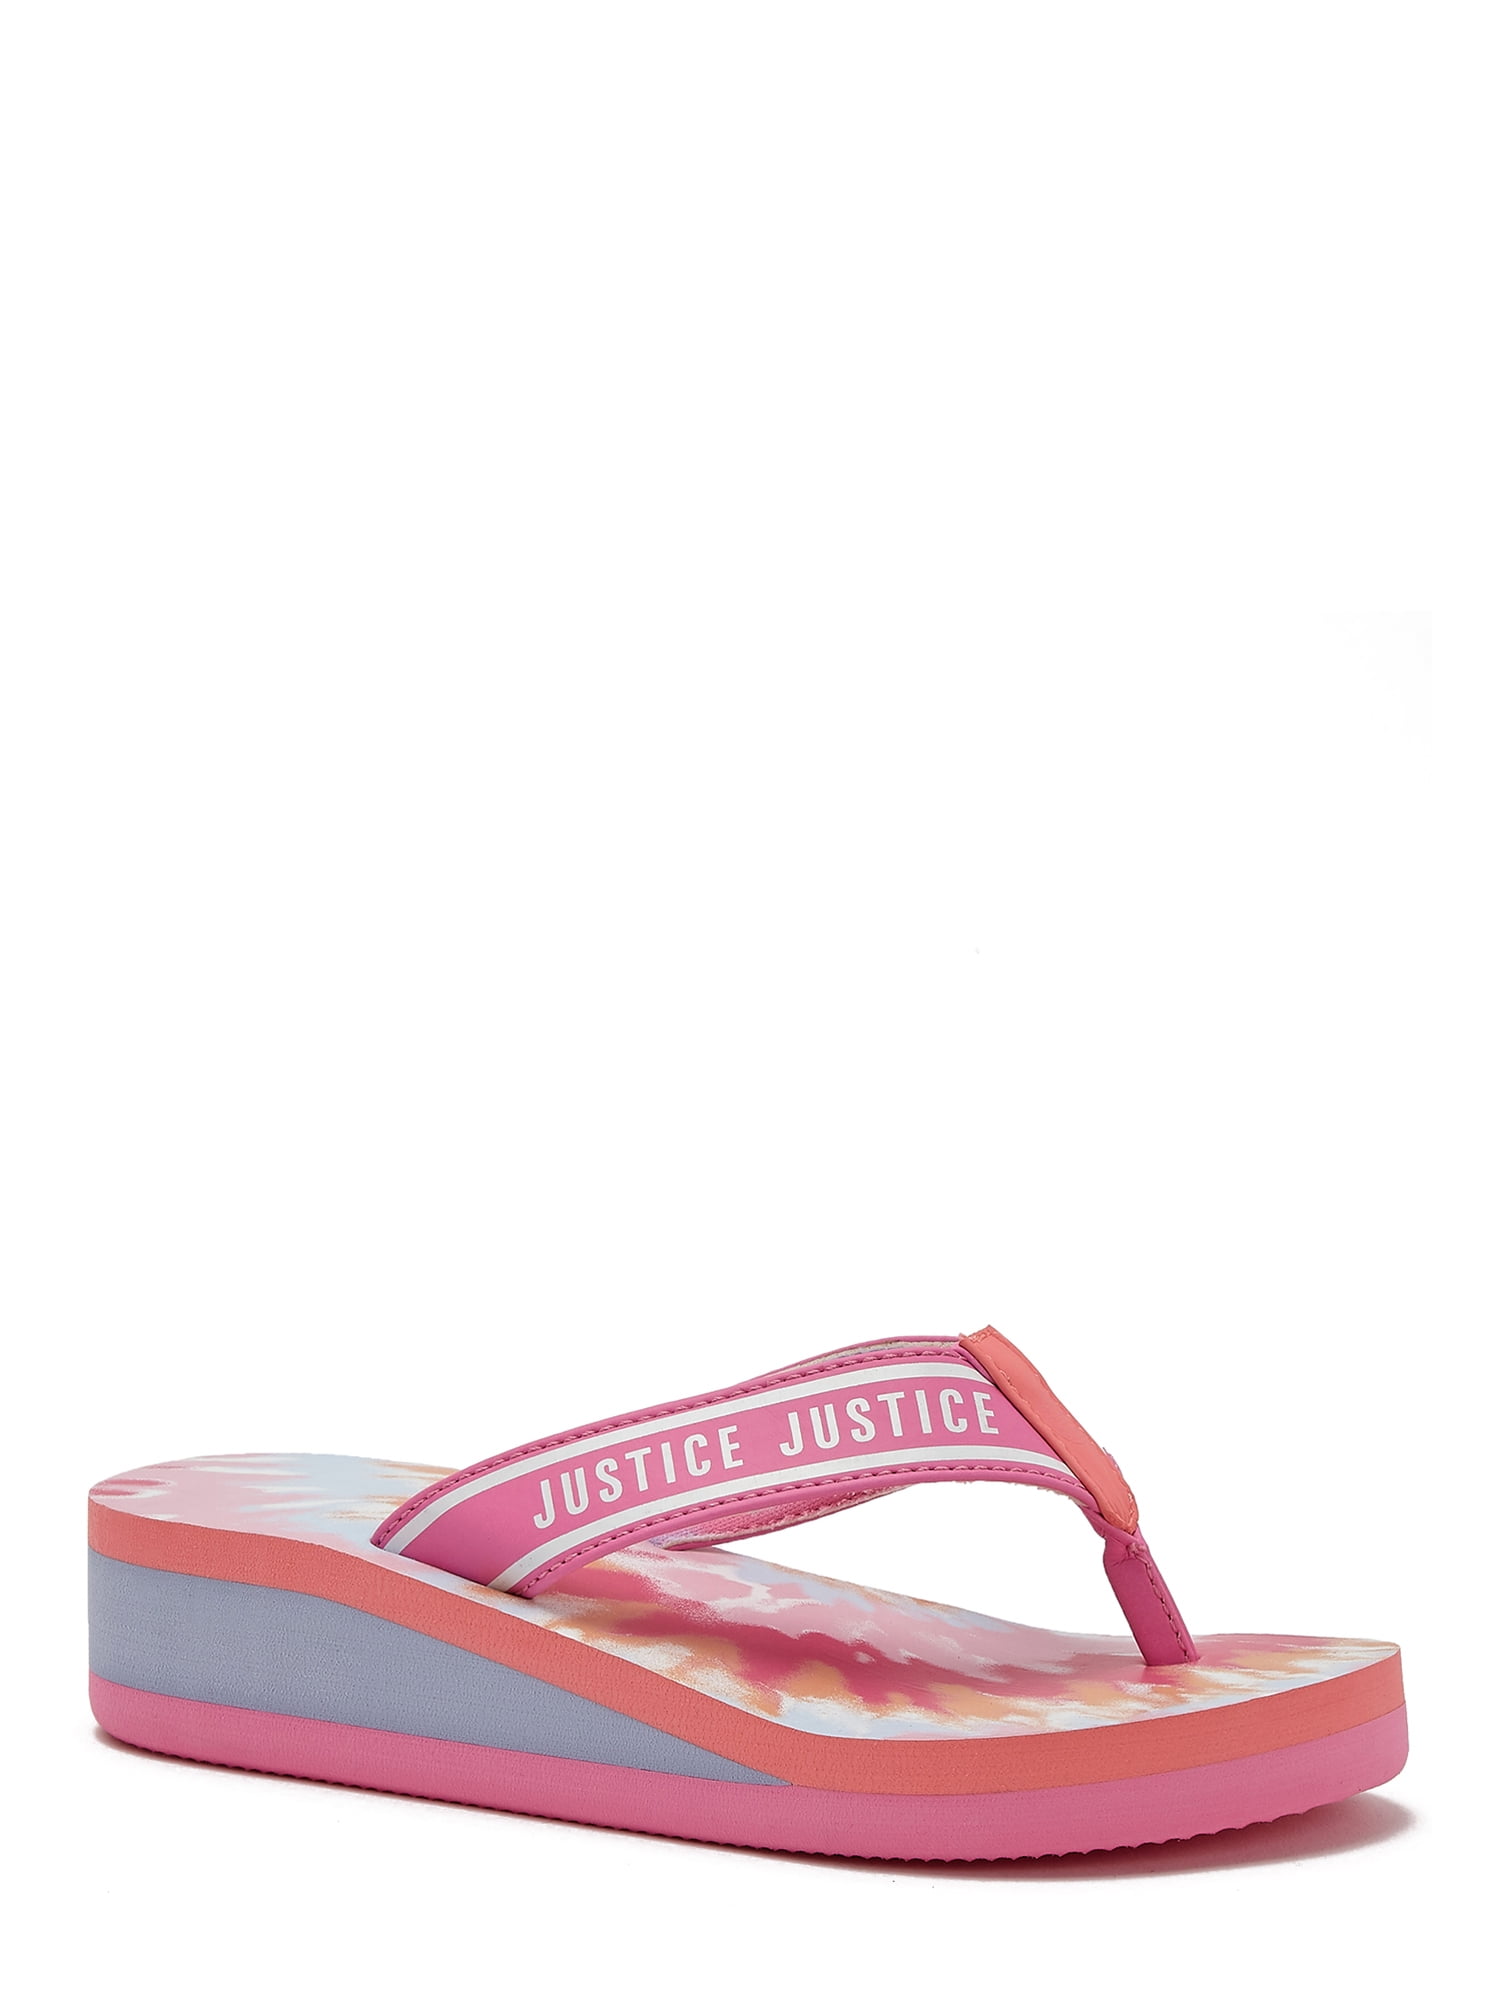 Justice Youth Girl's Wedge Thong Sandal, Sizes 13-6 - Walmart.com